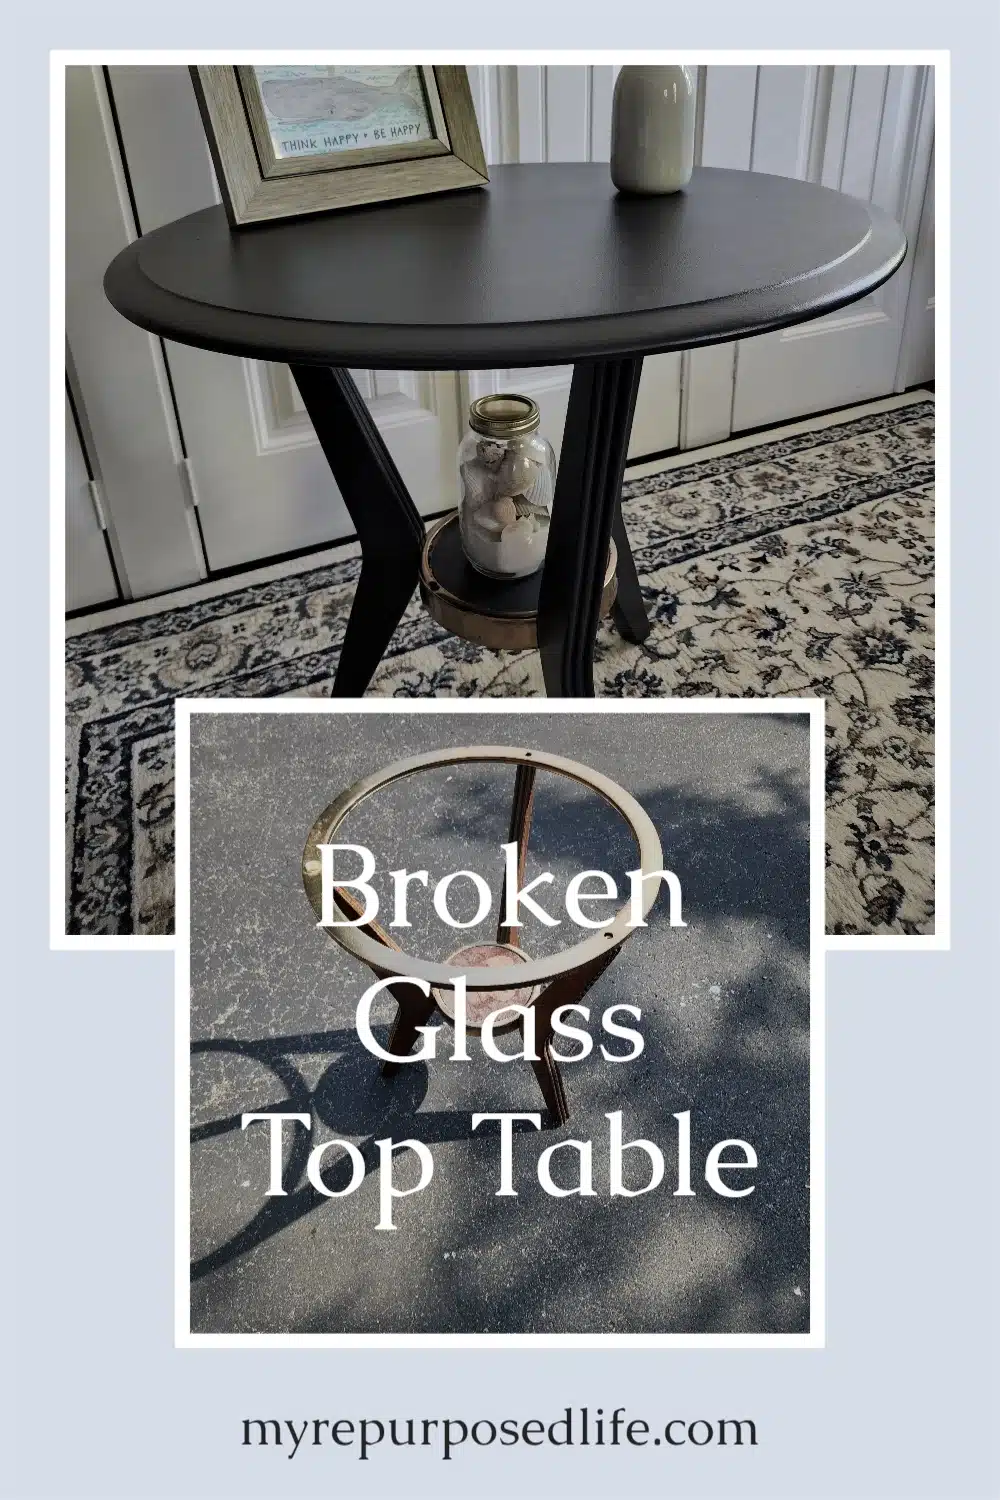 A table found on the roadside, gets a new lease on life with an old tabletop long forgotten. When you "marry" two pieces of furniture it just has to be a win/win, right? #MyRepurposedLife #repurpose #upcycle #table #roadkillrescue #retro via @repurposedlife